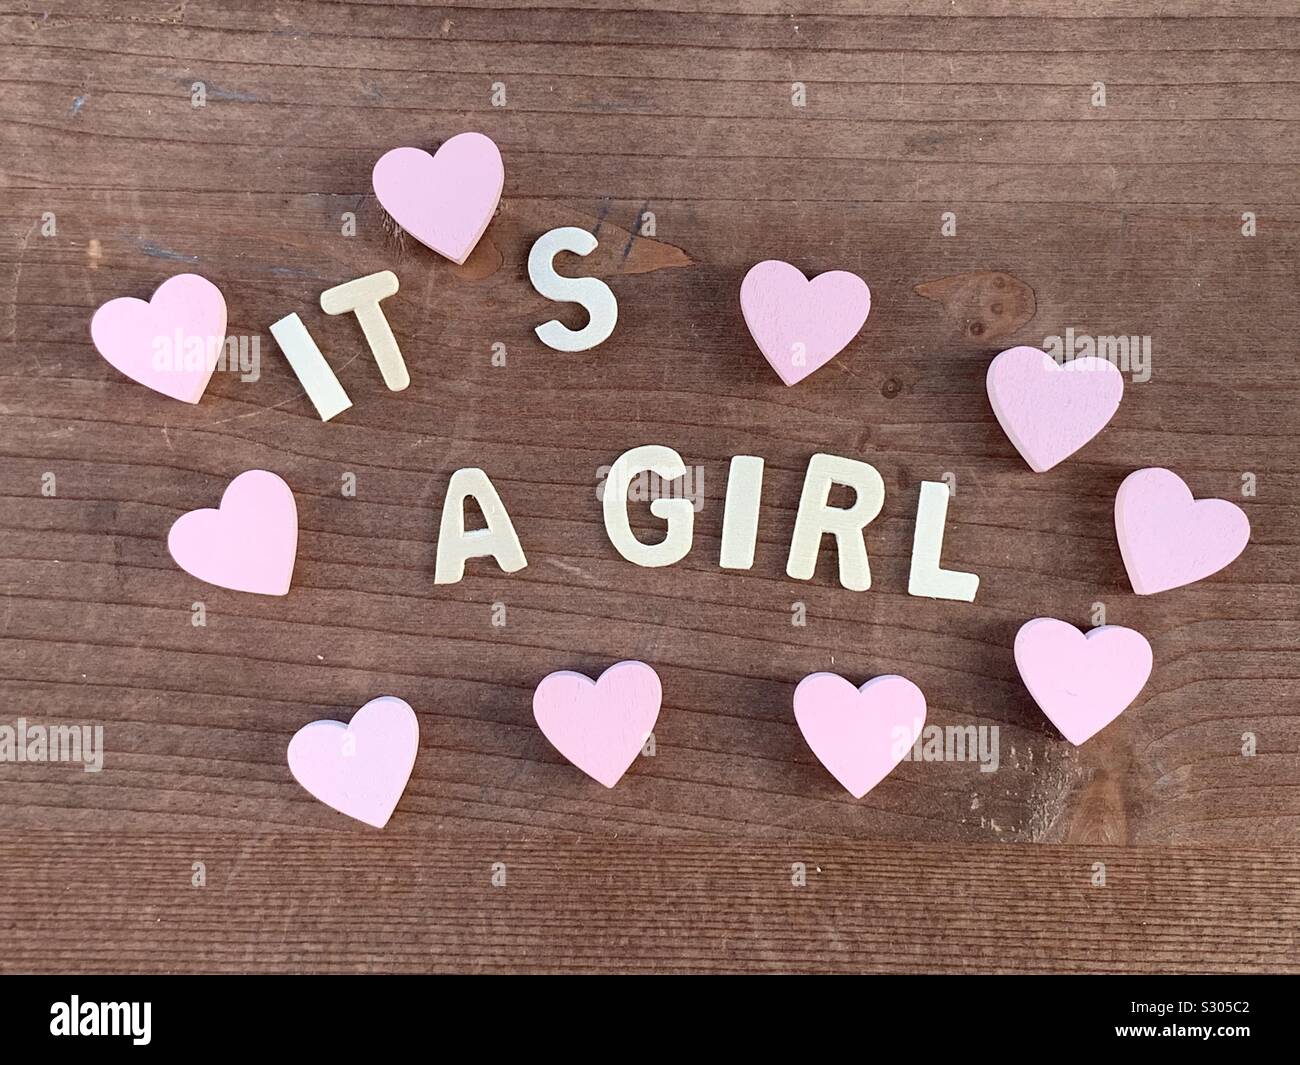 It’s a girl, congratulations message for a new born with wooden letters and pink hearts Stock Photo